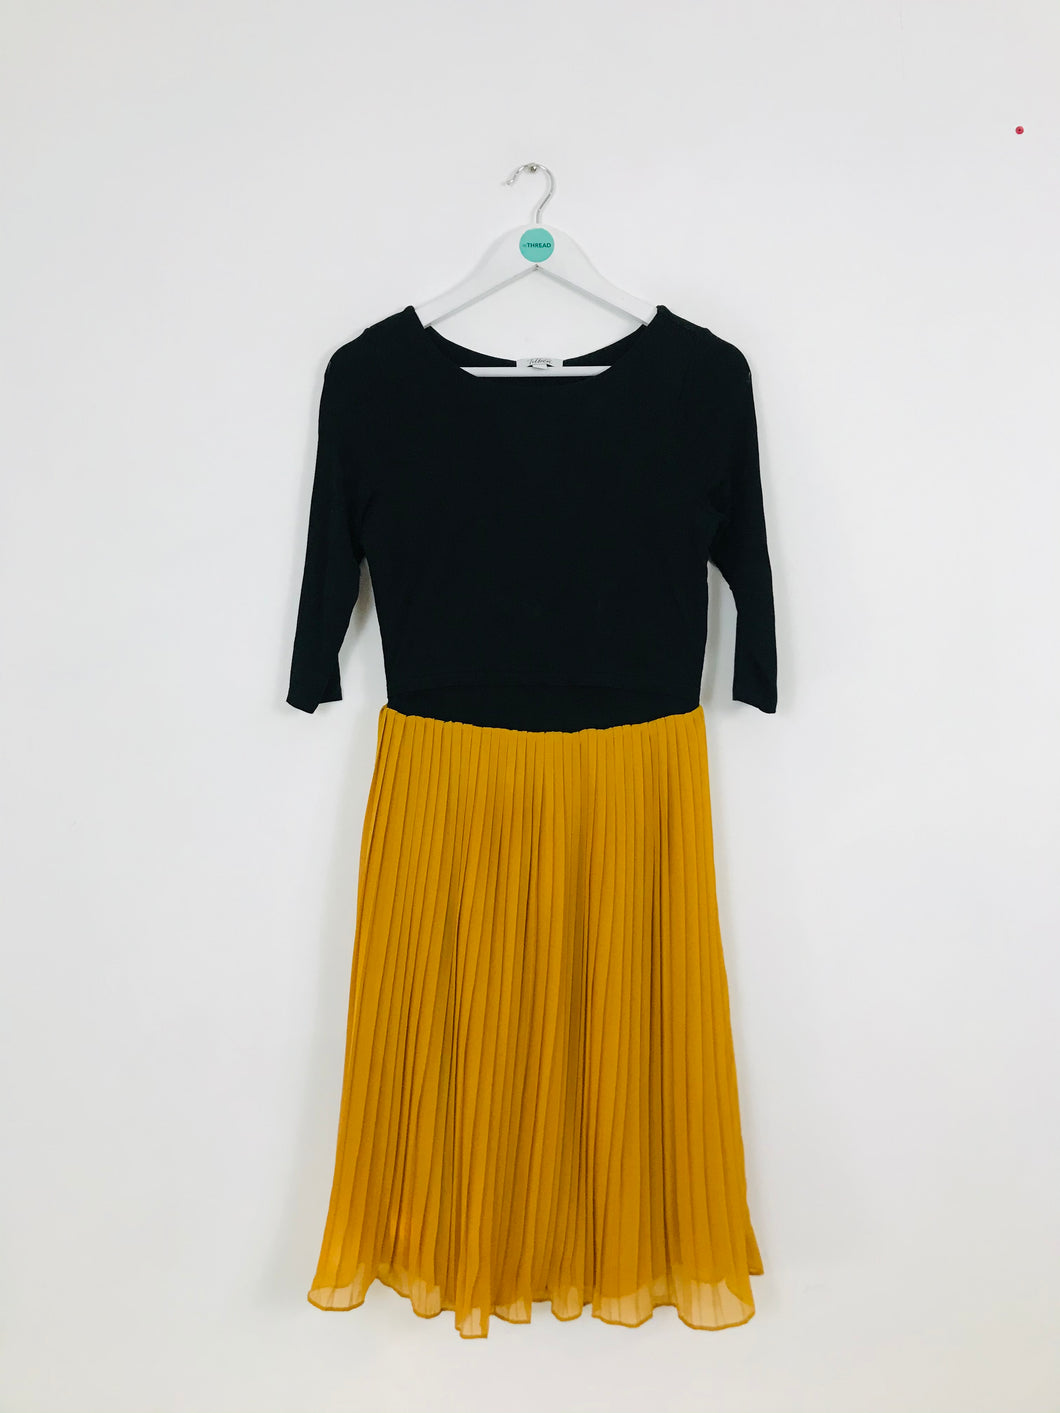 Tilbea London Pleated A-Line Maternity Dress | S UK8 | Black and Yellow